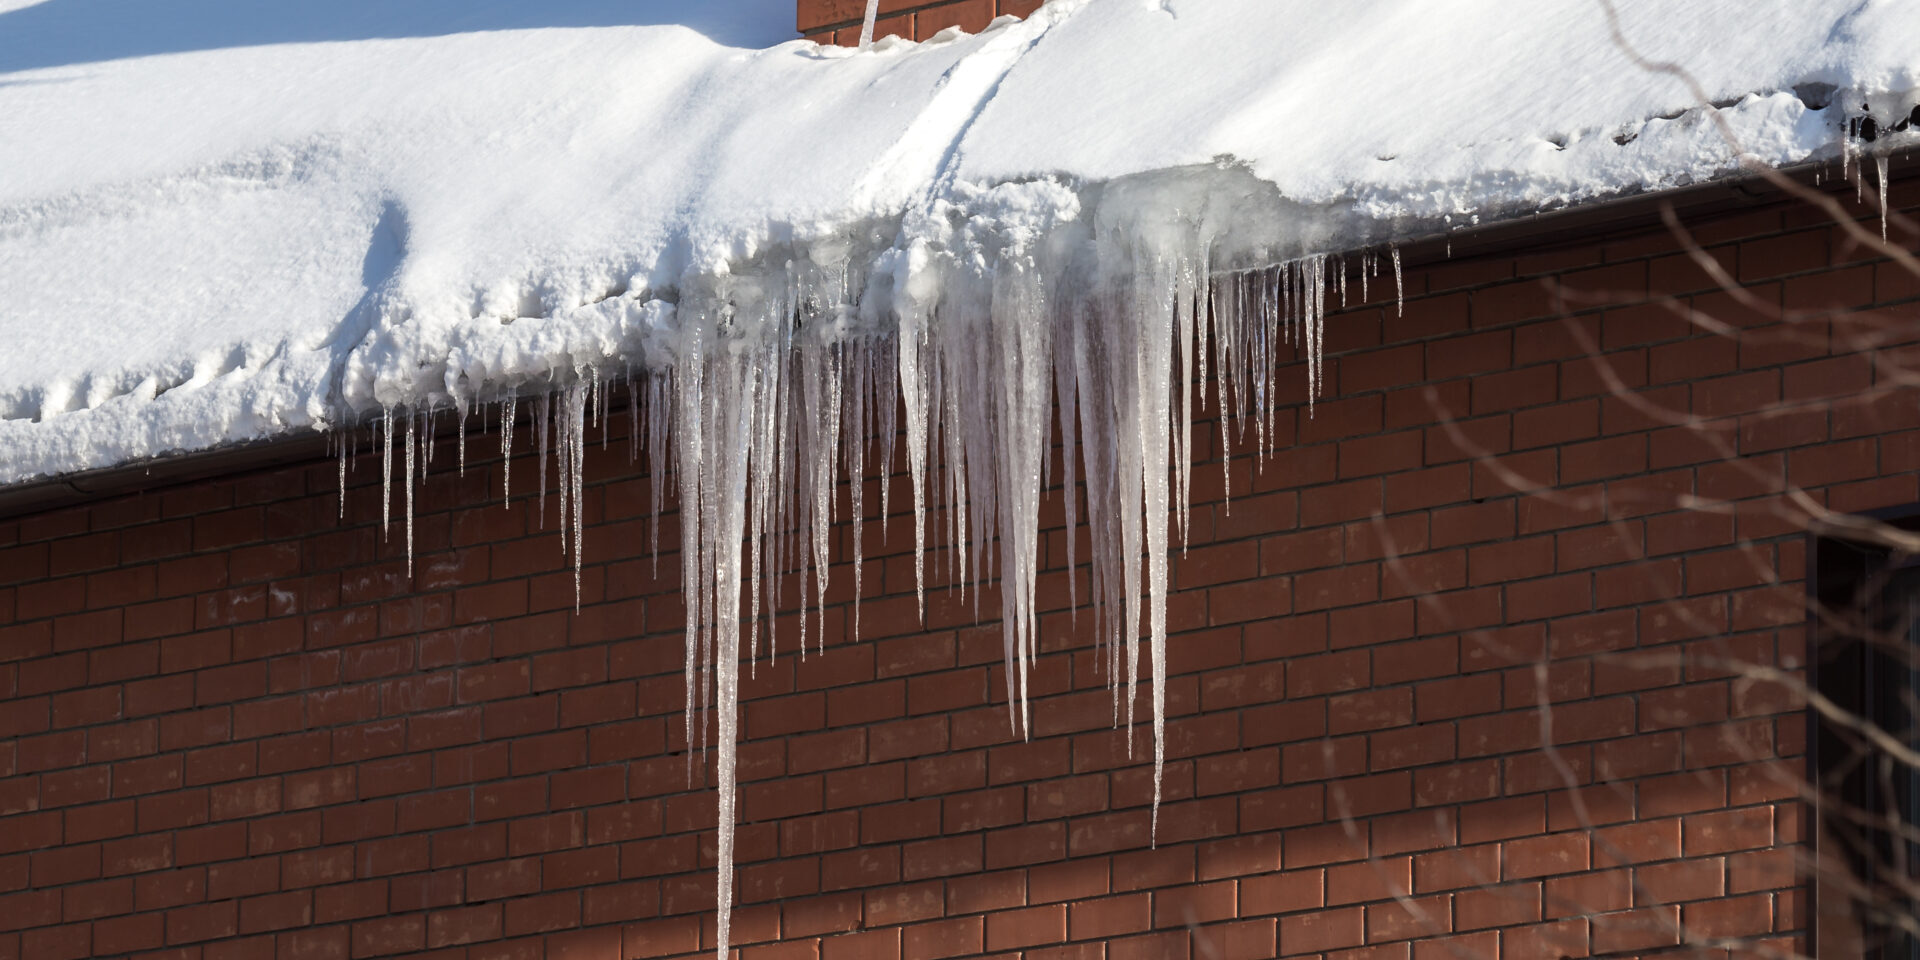 Large,Icicles,Hanging,From,The,Roof,Of,A,Brick,House